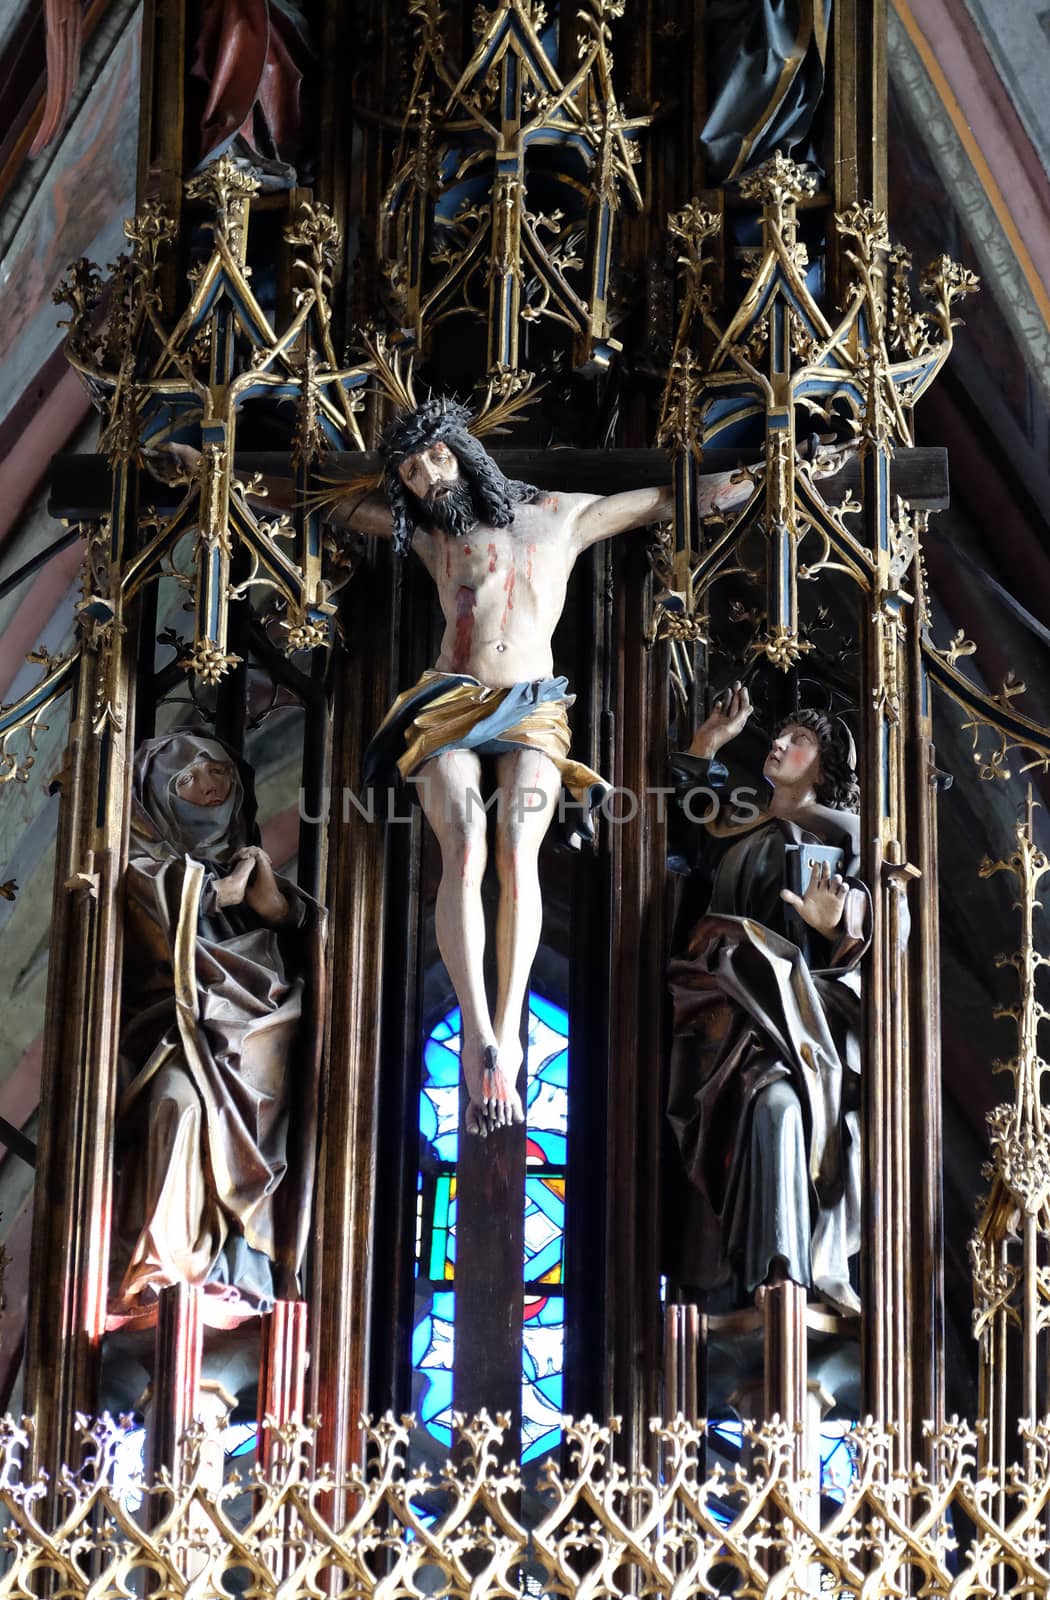 Crucifixion, Virgin Mary and St. John under the cross, main altar in Parish church in St. Wolfgang on Wolfgangsee in Austria